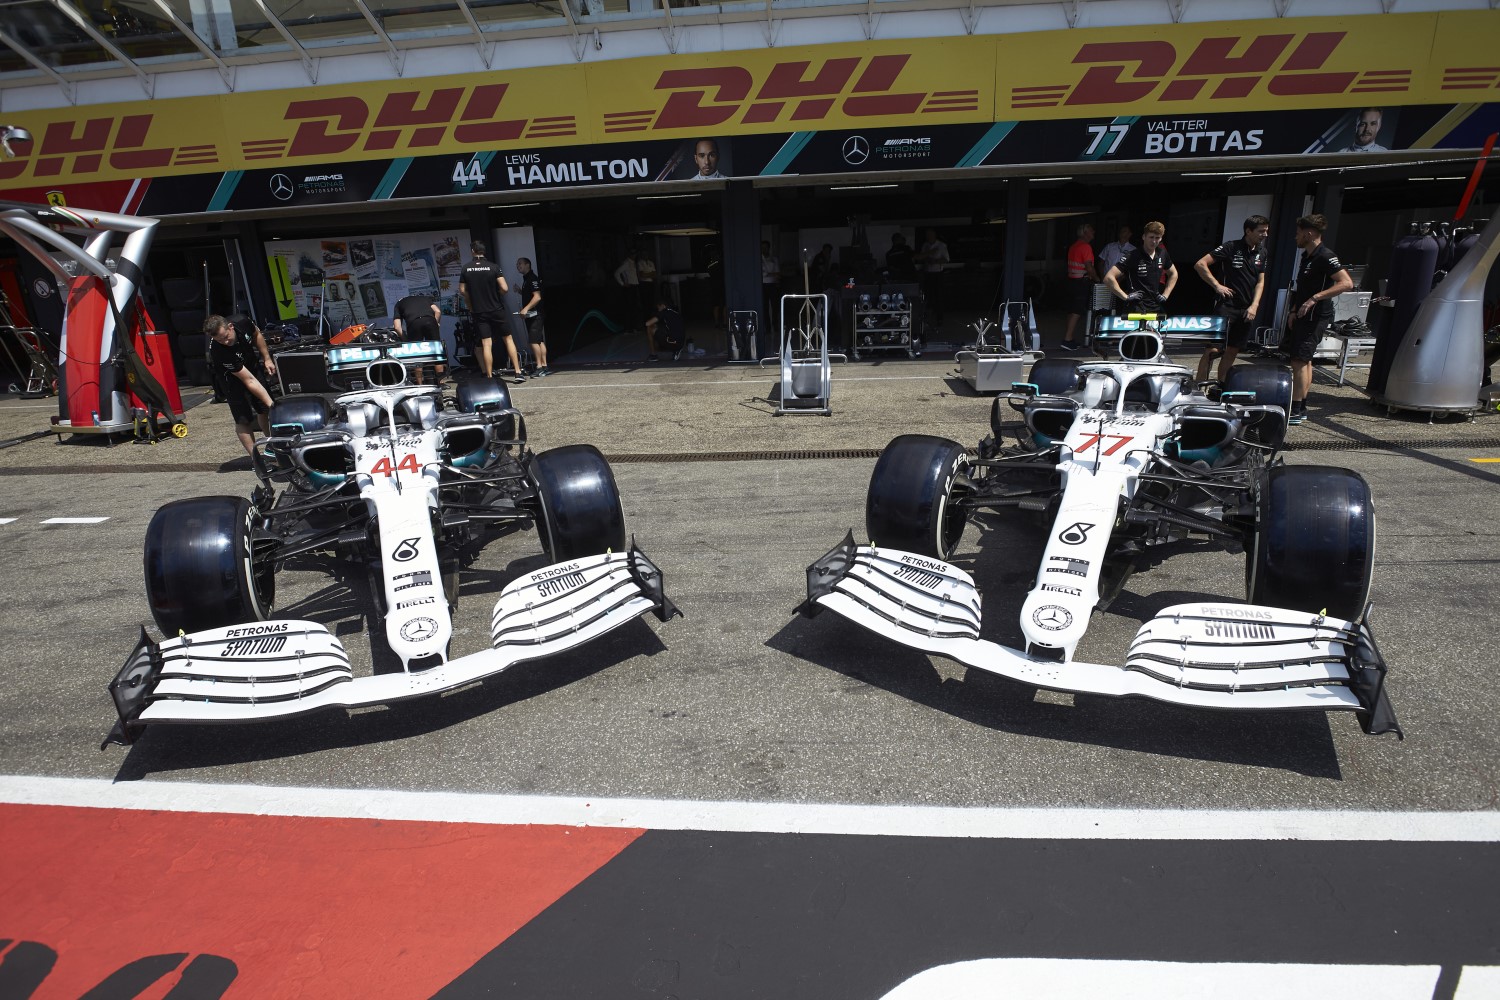 Silver, white. It does not matter, Mercedes will dominate